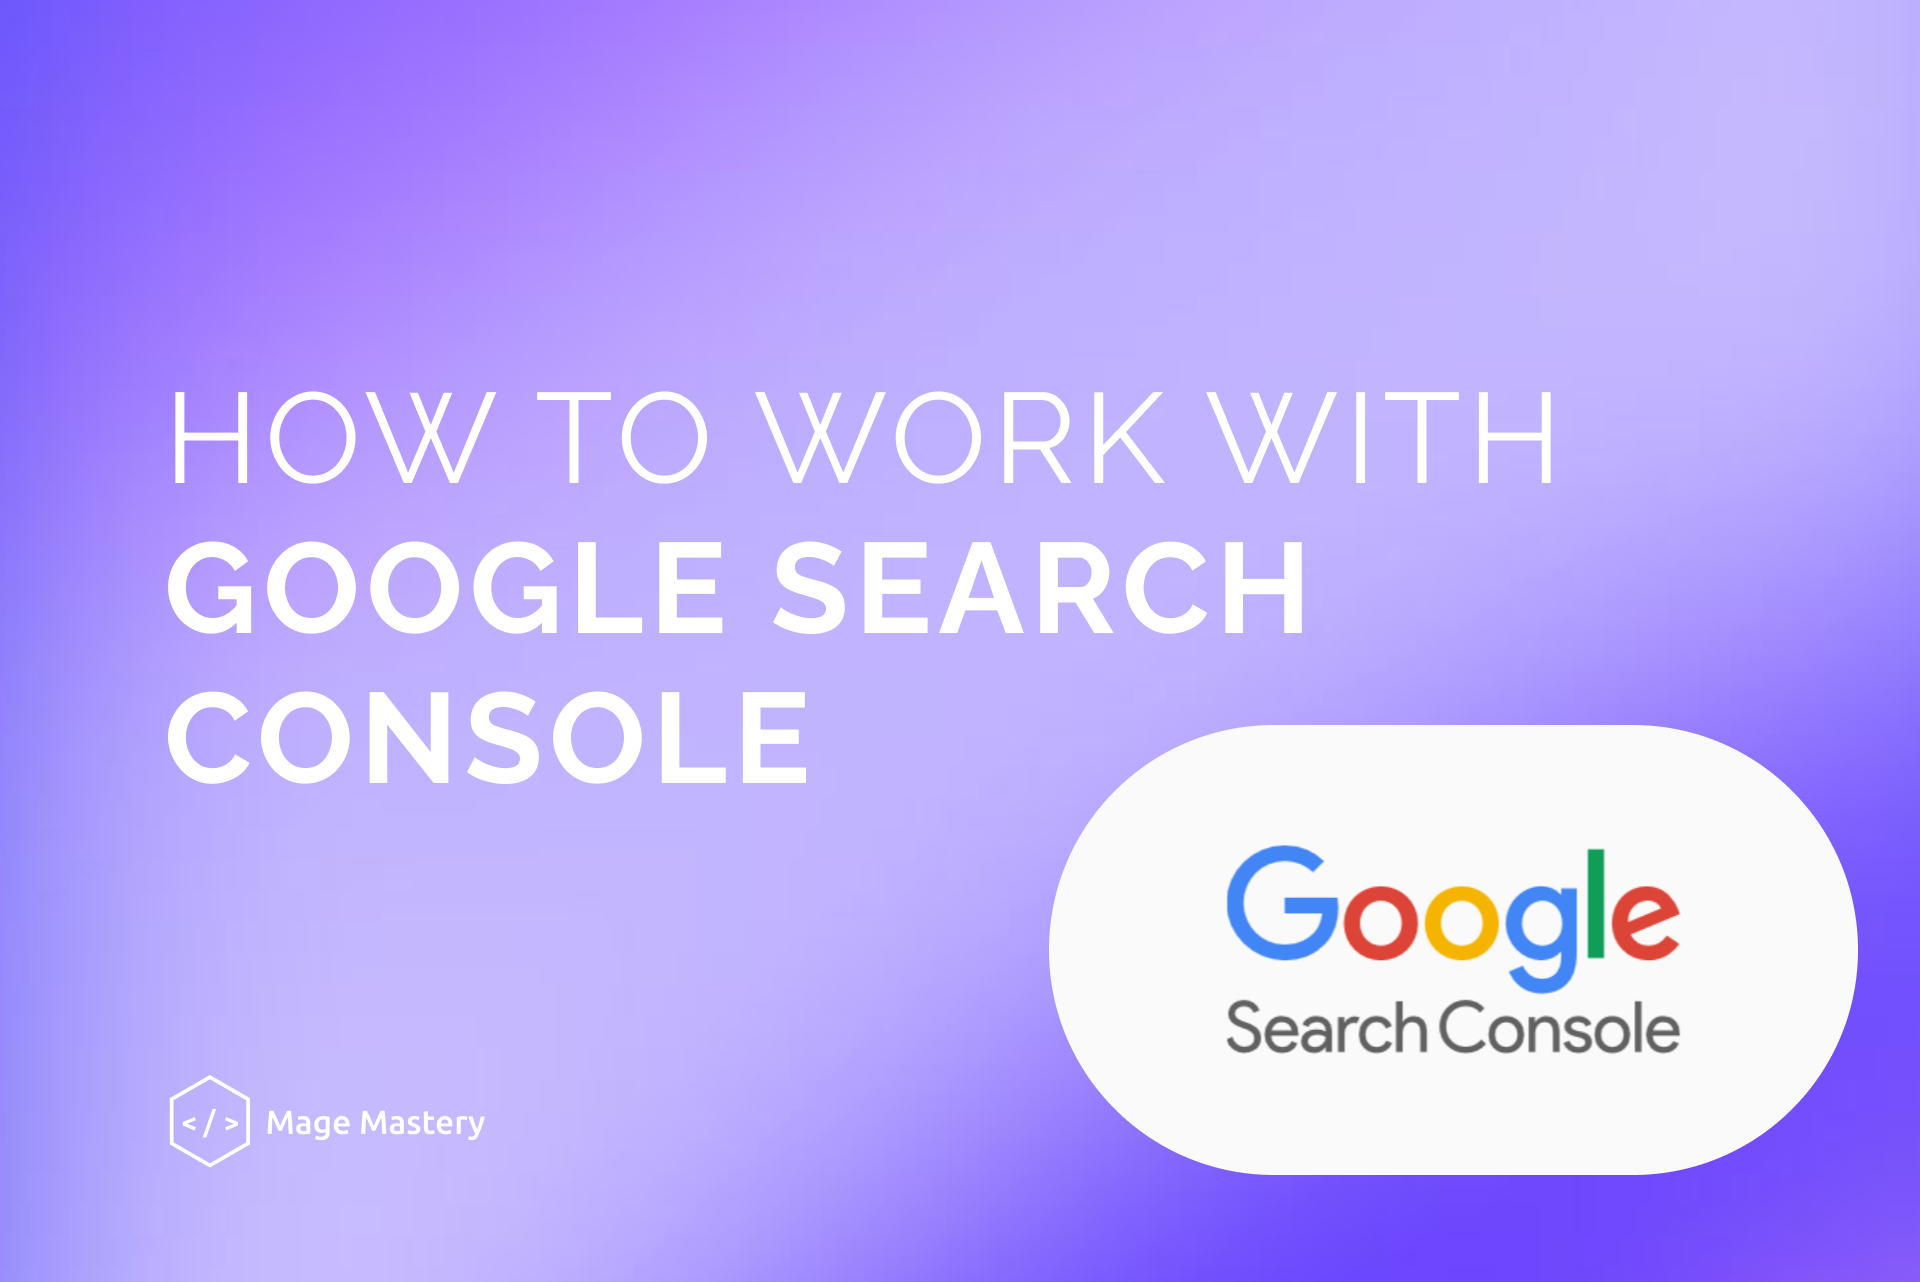 What is Google Search Console and how to use it